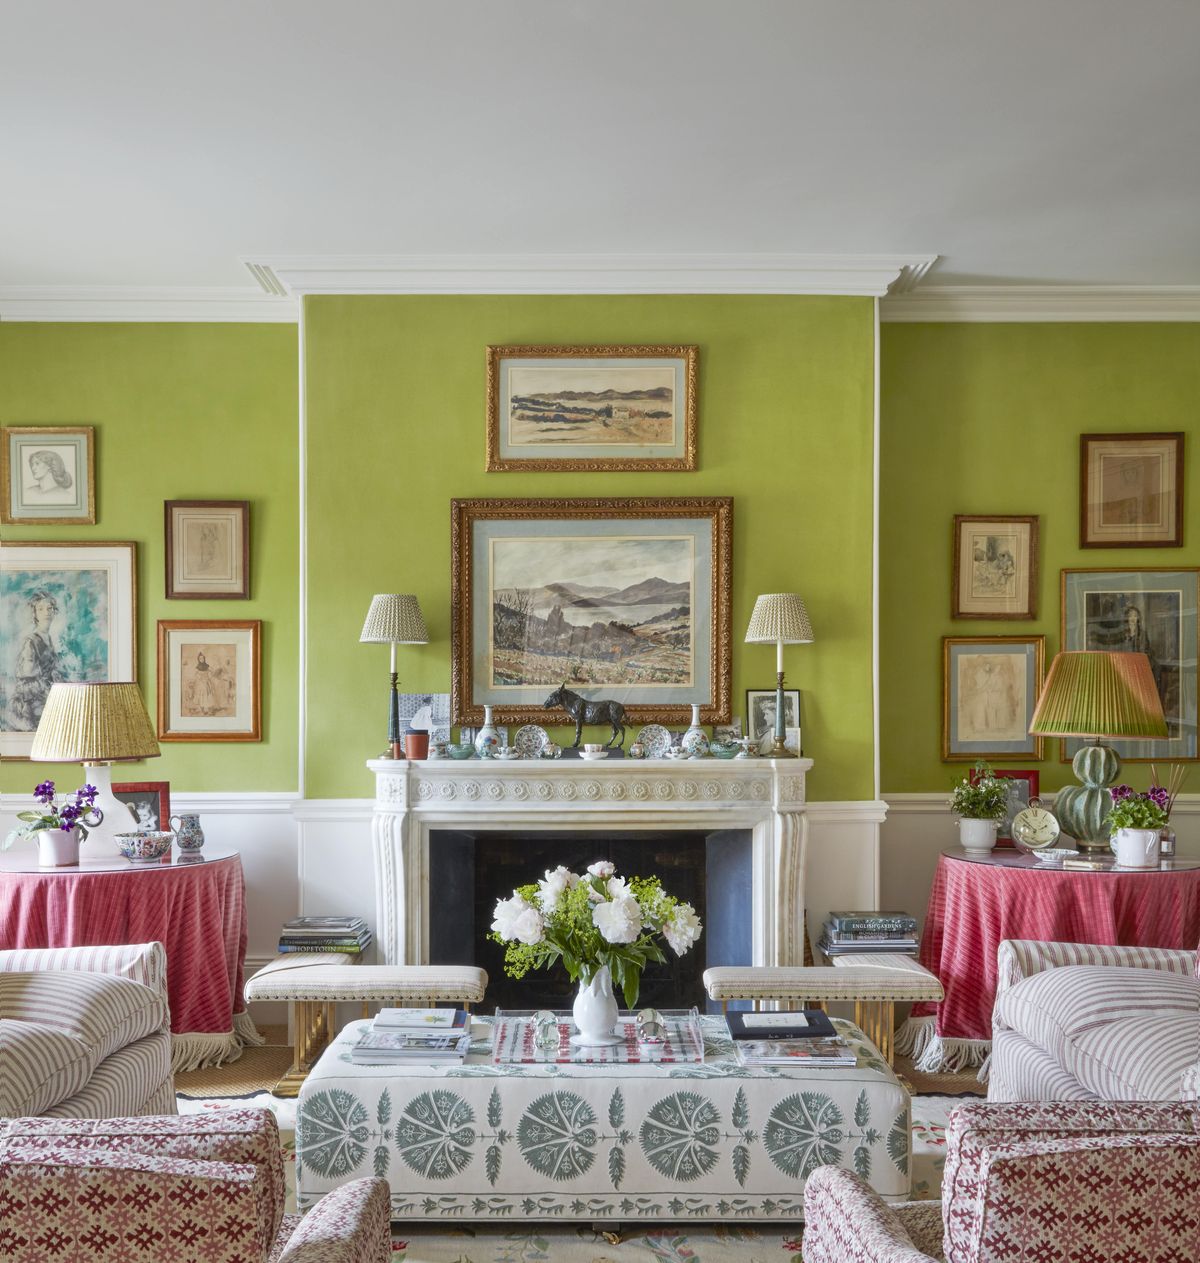 landscape paintings hang above the fireplace in a sitting room with green walls